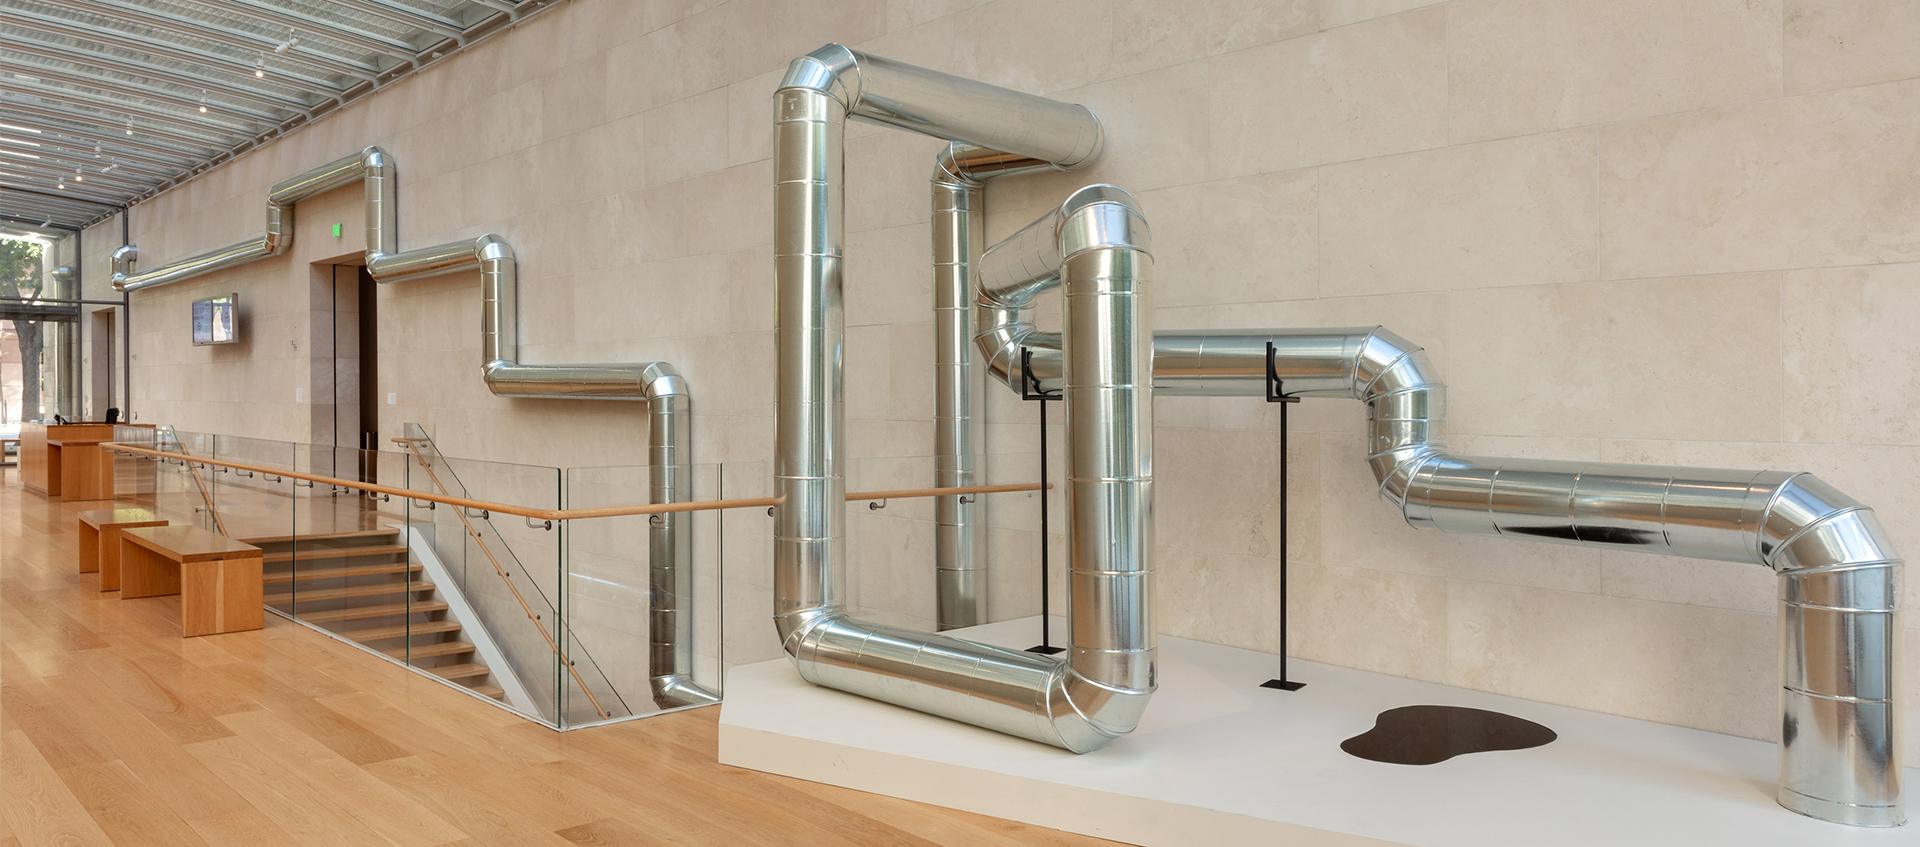 An industrial steel pipeline hangs on a wall above a museum stairwell. It frames architectural elements and ends on a plinth with a pool of oil on it.